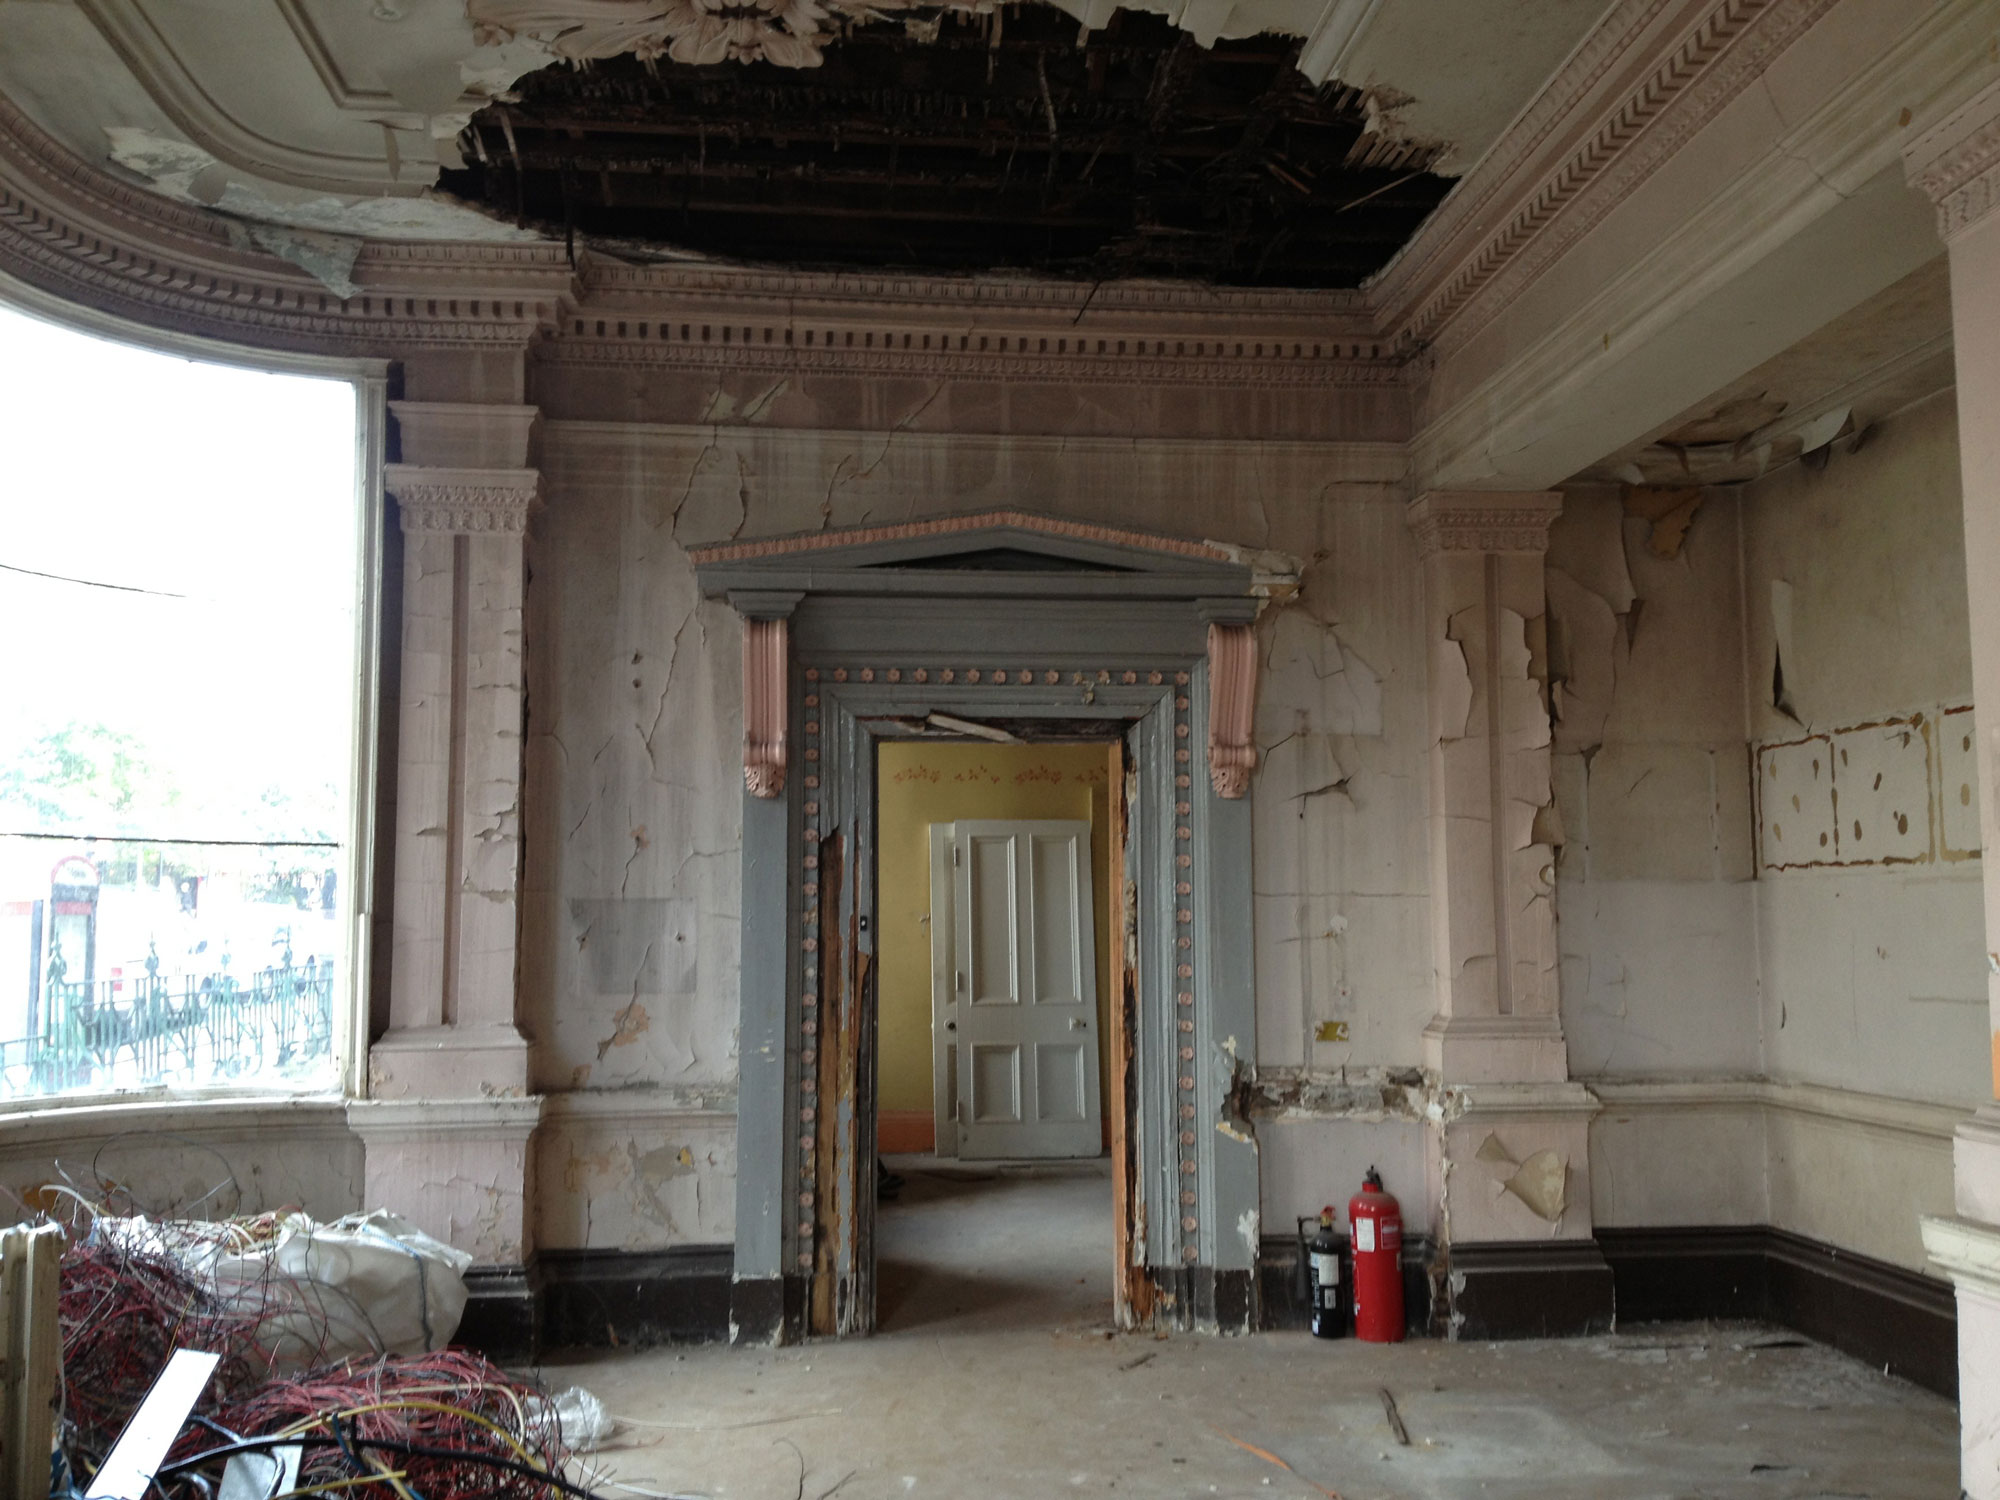 Crumbling paintwork on a grand interior with neoclassical scrollwork around a blue door.